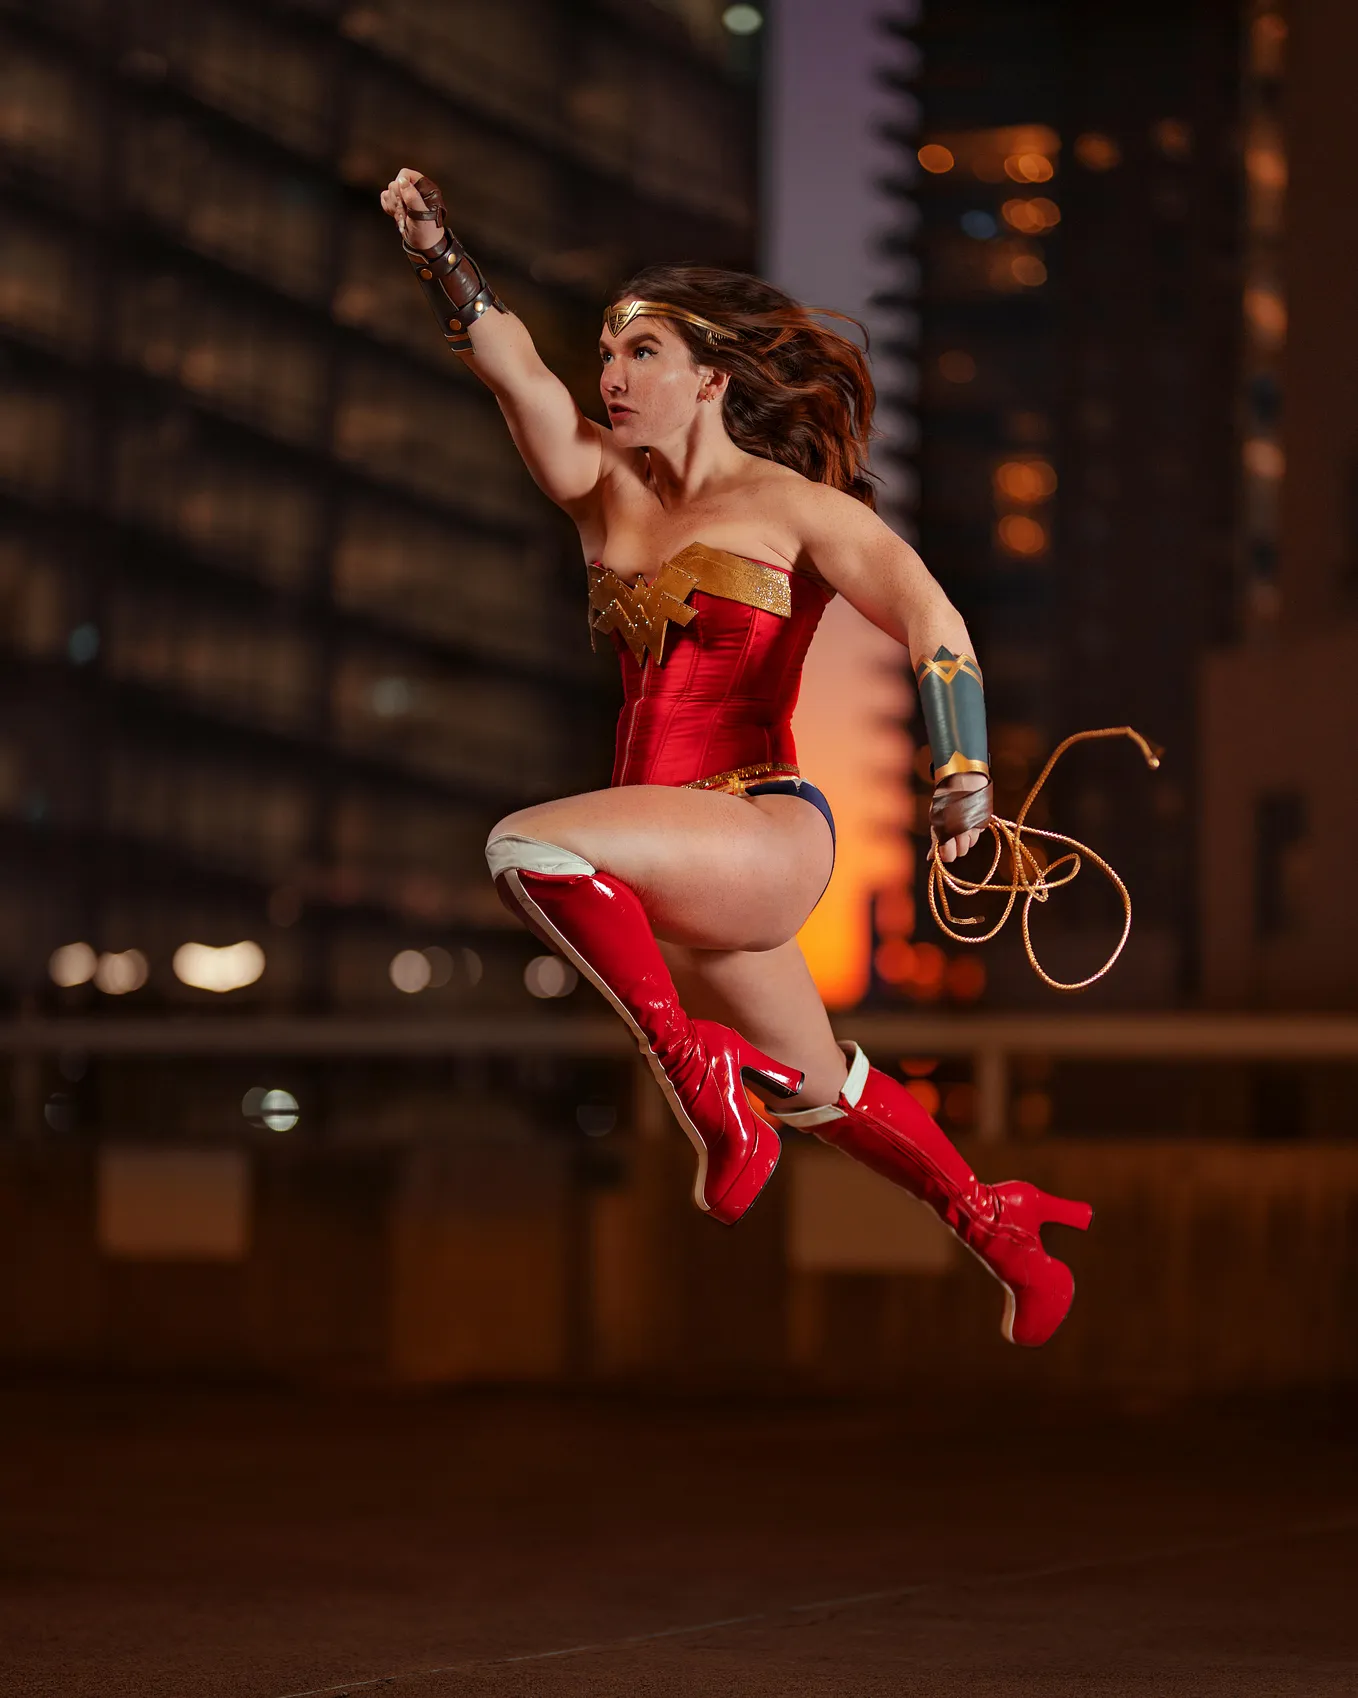 Wonder Woman in action. How to train like Gal Gadot’s Wonder Woman and what to expect from this intense exercise routine